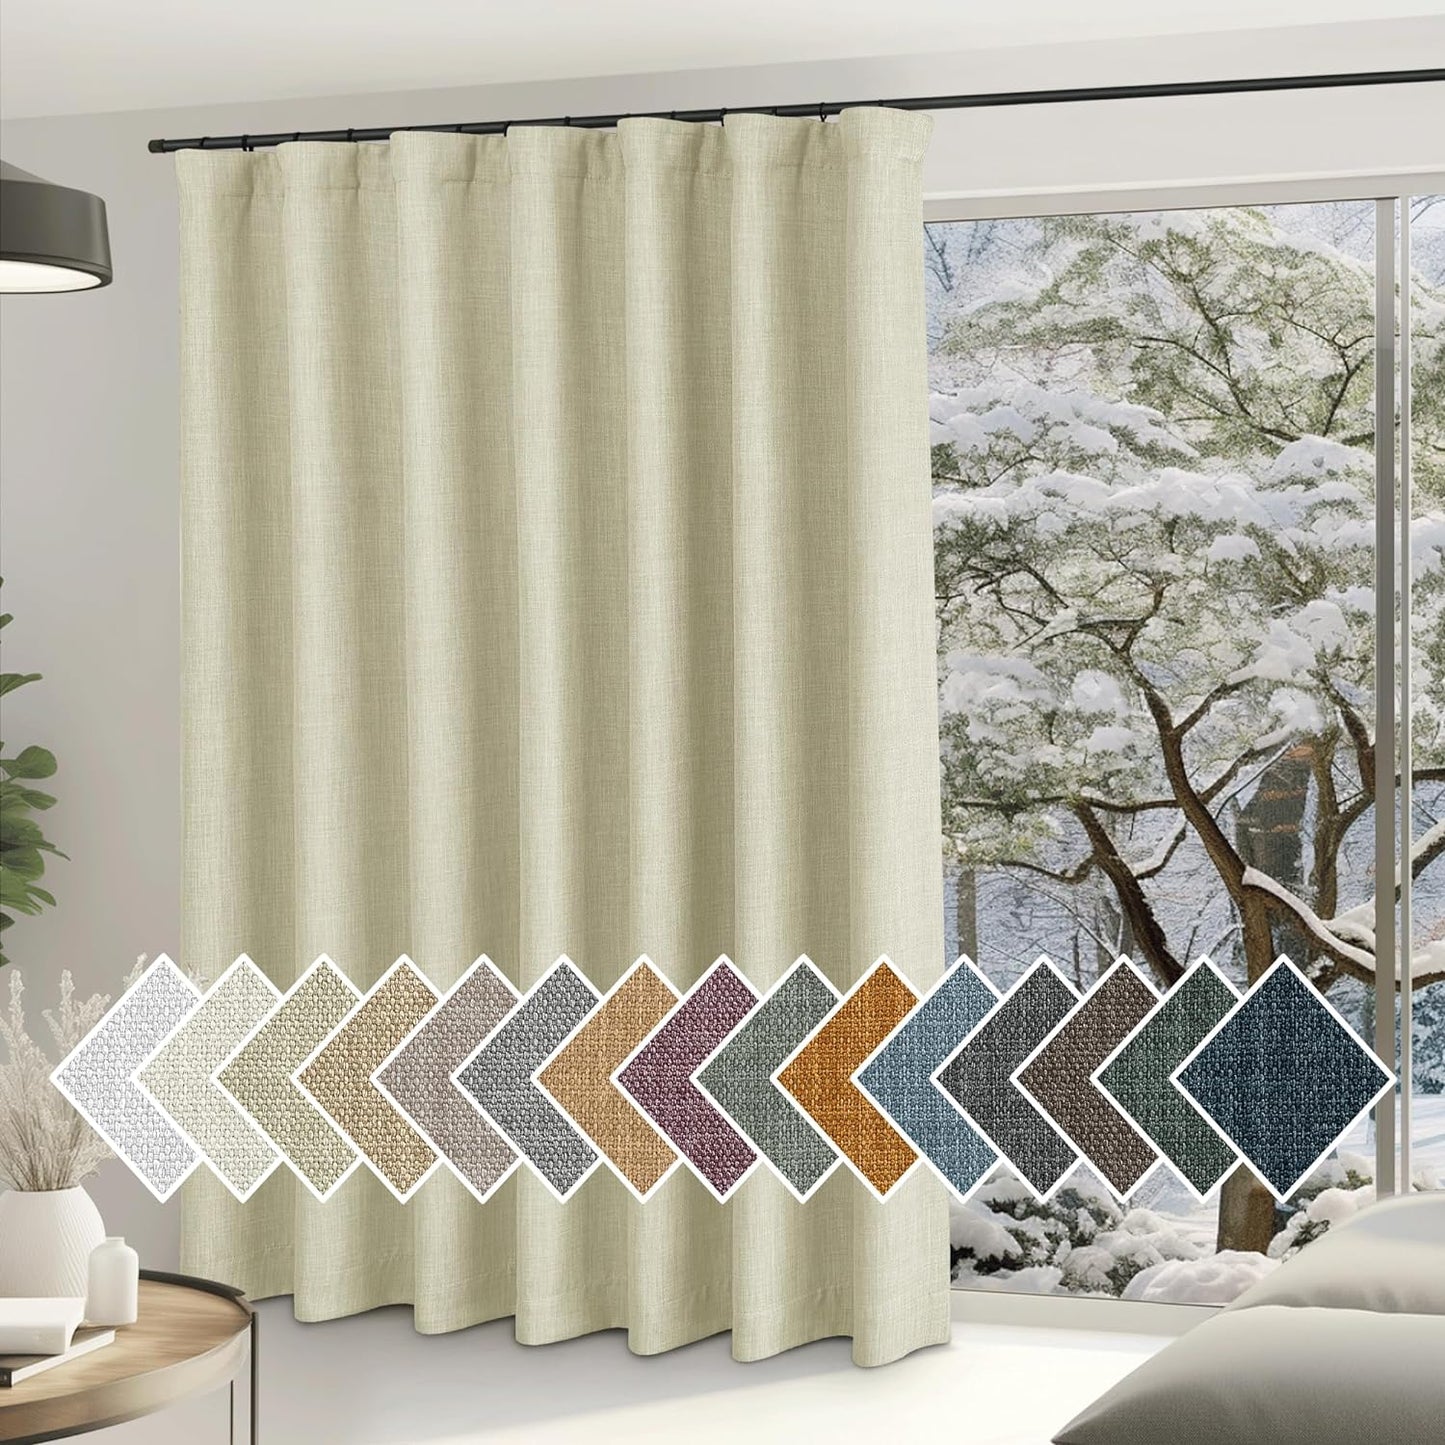 NICETOWN Sliding Door Curtains 84 Inch Length for Bedroom, Room Darkening Hook Belt/Rod Pocket/Back Tab Faux Linen Thermal Window Treatments for Living Room, Natural, W100 X L84, 1 Panel  NICETOWN Beige W100 X L84 